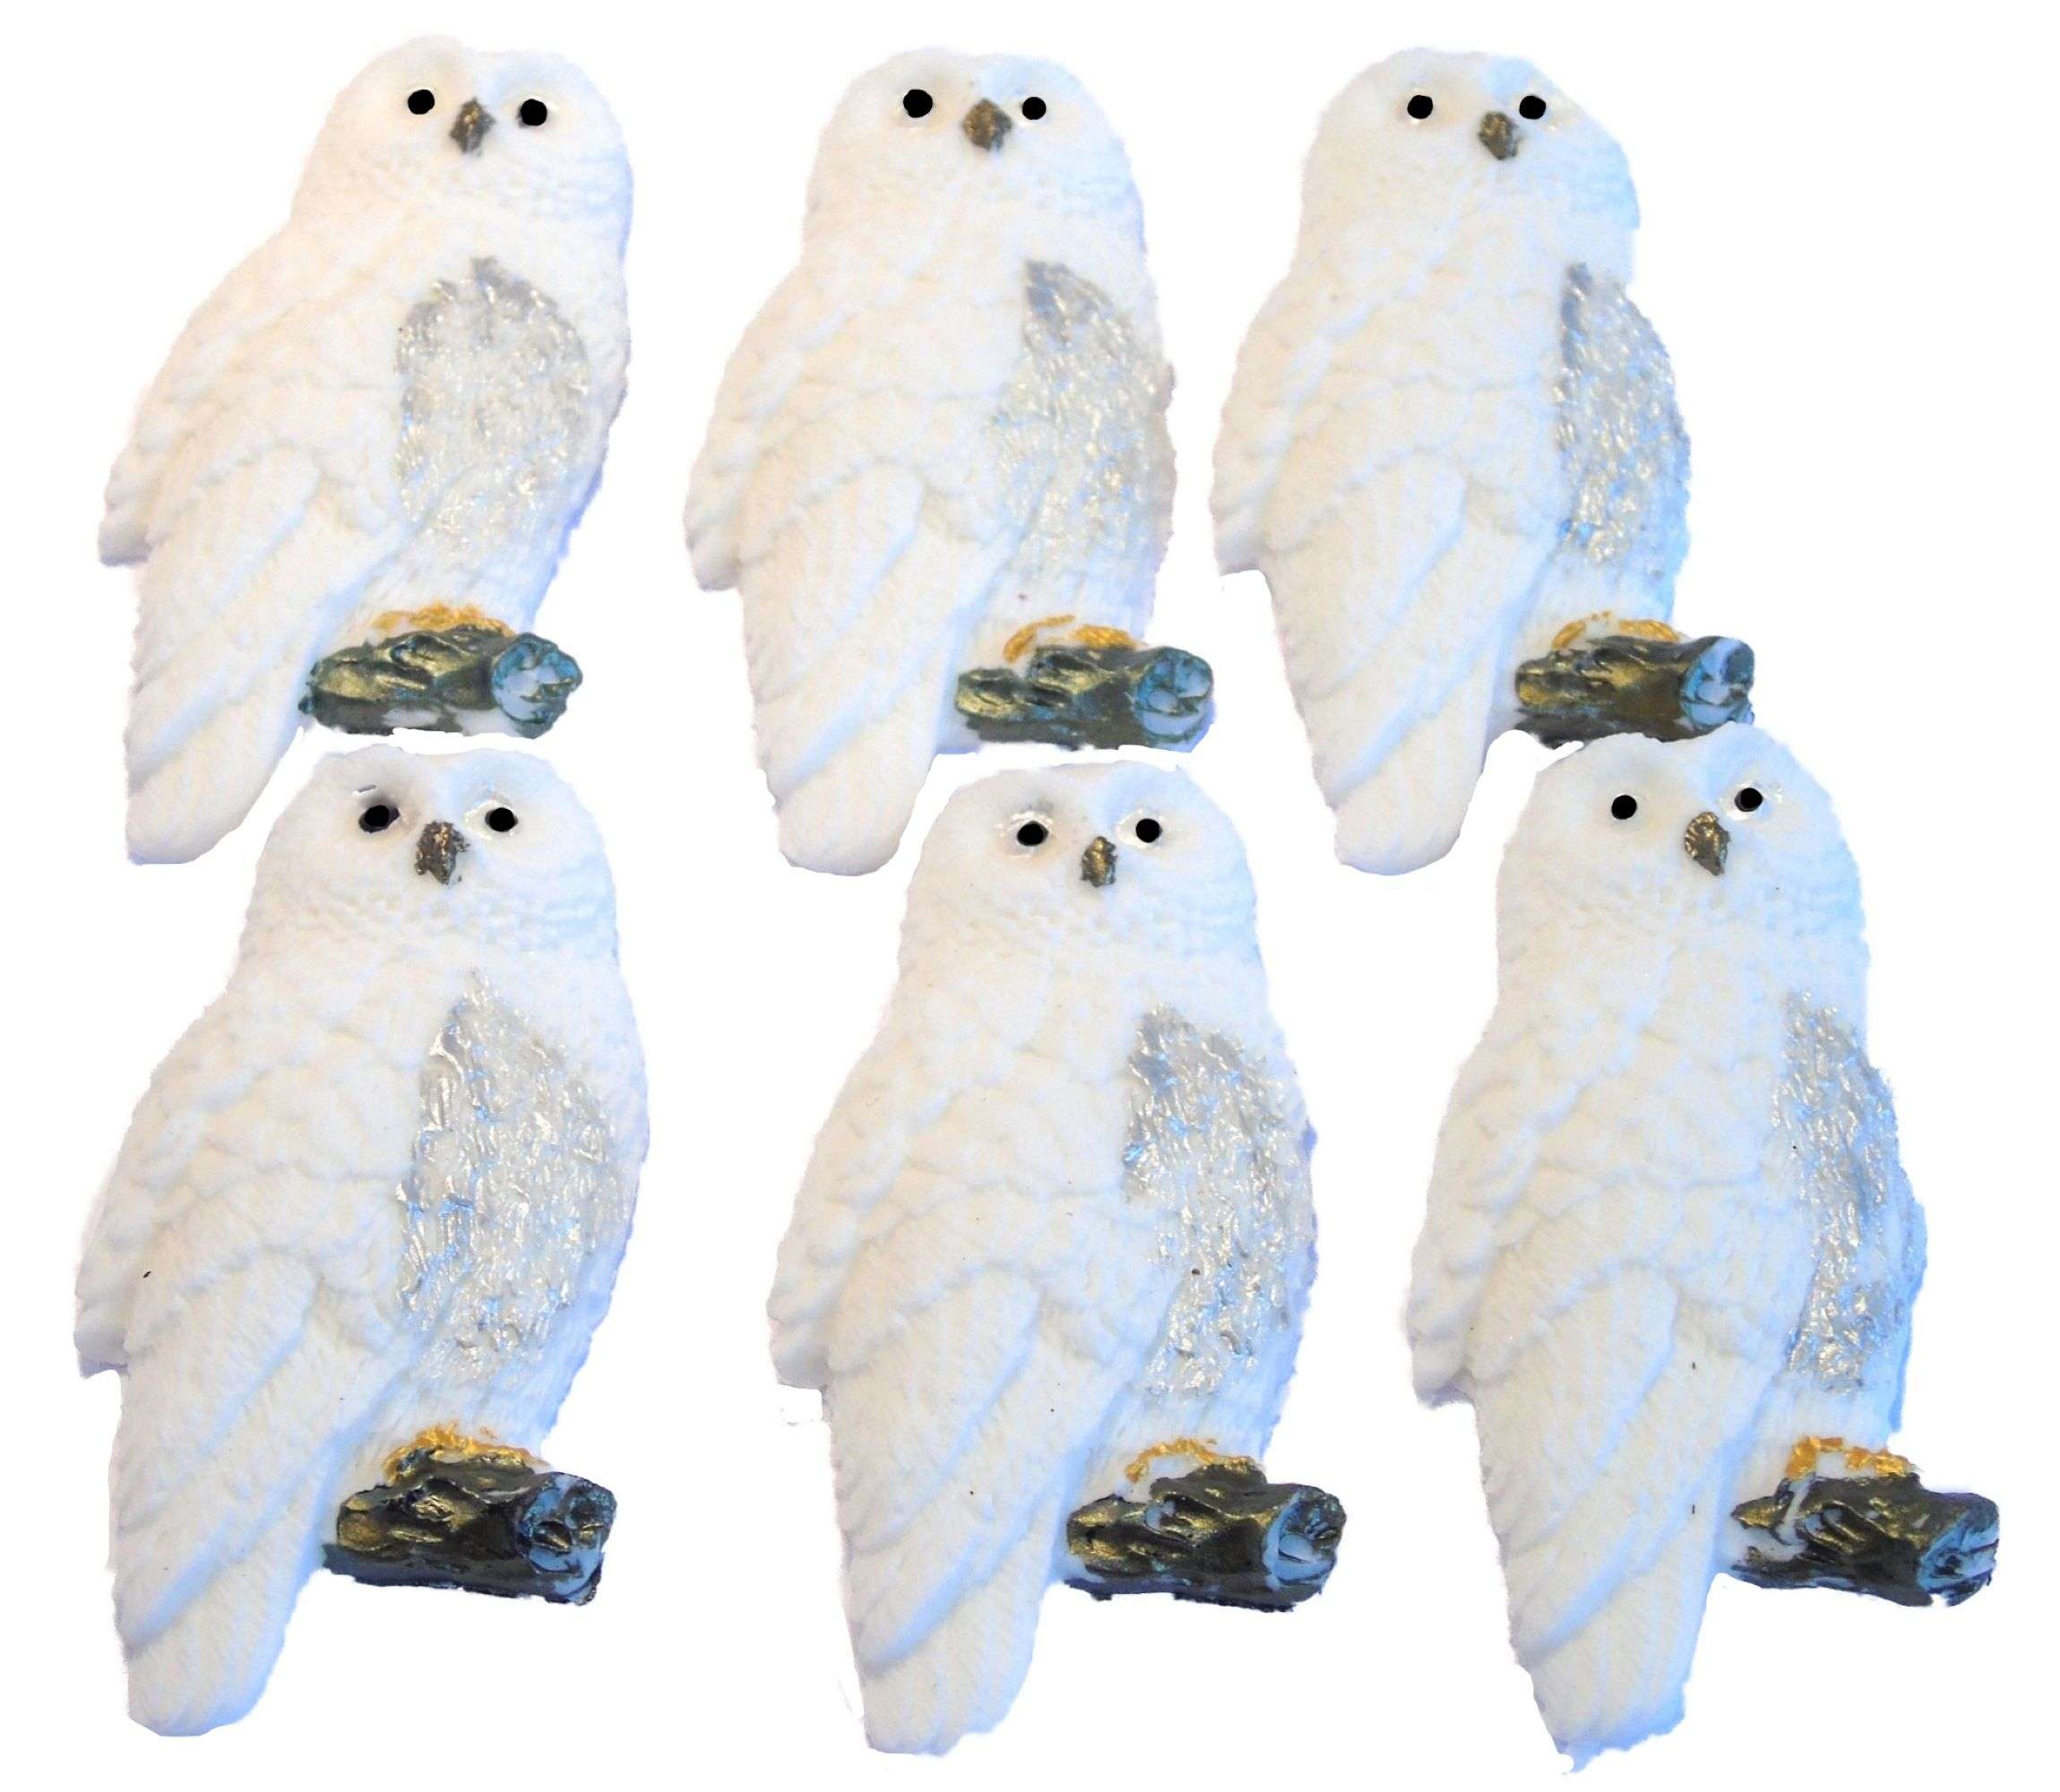 Inked620owls20JPEG1 LI Your cupcake and cake bakes are sure to be a big hit when decorated with these lovely white owls. These gone down a treat at harry potter or Halloween parties. Each one is hand painted with lovely edible paint. If you would prefer different colour owls, please let us know by adding a note to your order. 6 cute white owls cupcake topper decoration, ideal cupcakes, and cake topper decorations for Birthday, Approx Size: 7cm -3cm